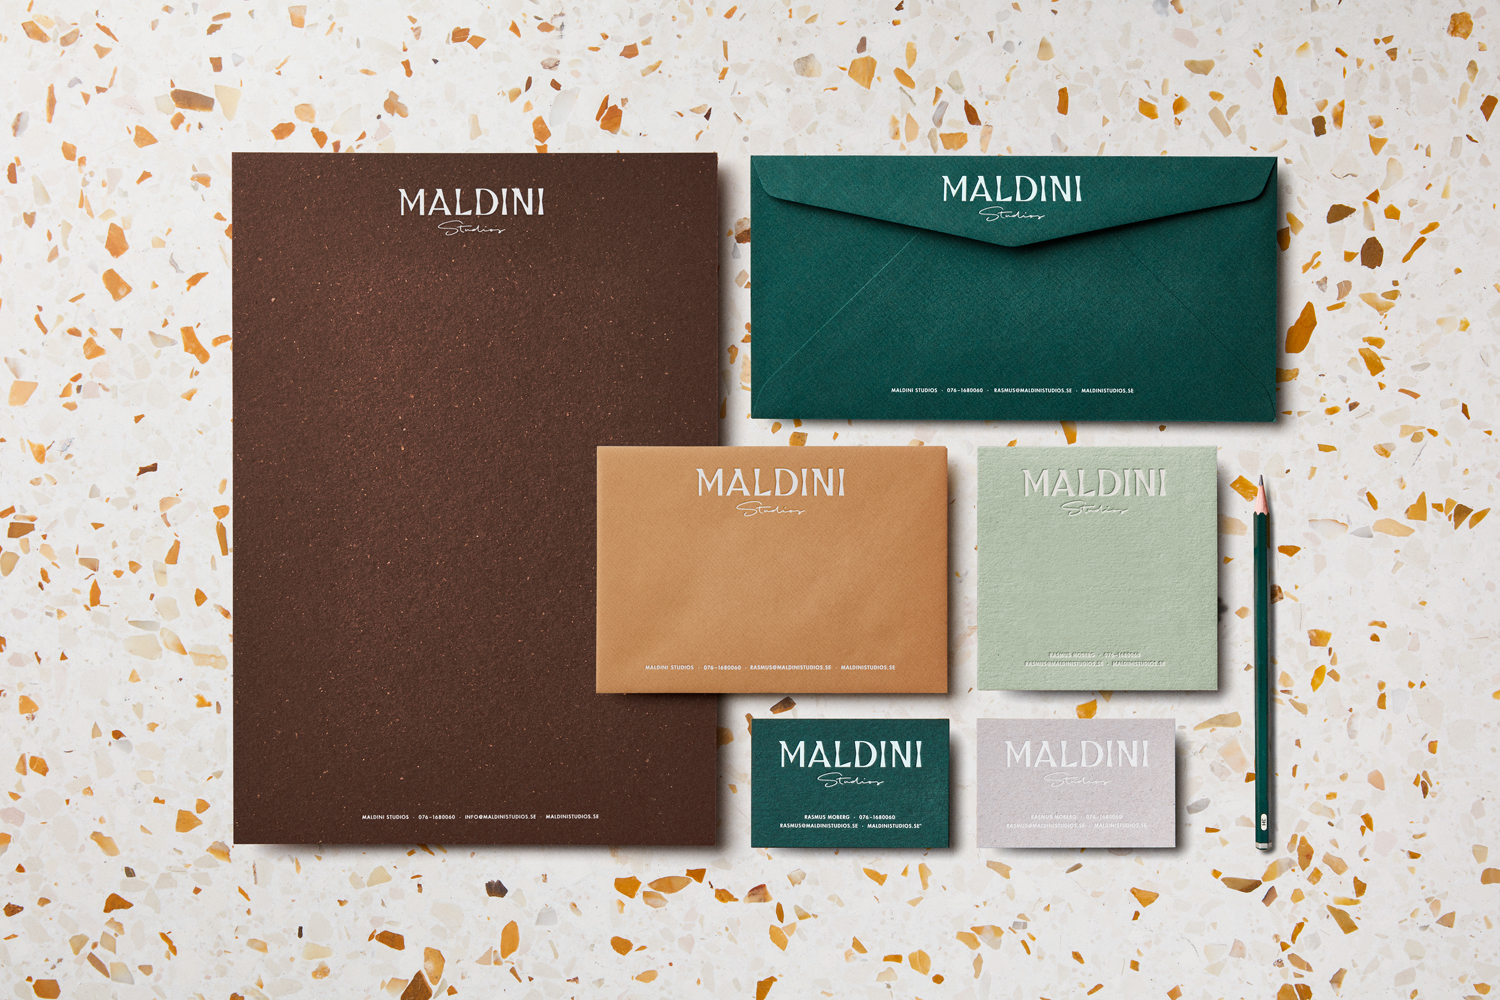 Logotype and letterpress stationery by Jens Nilsson for interior design and carpentry business Maldini Studios